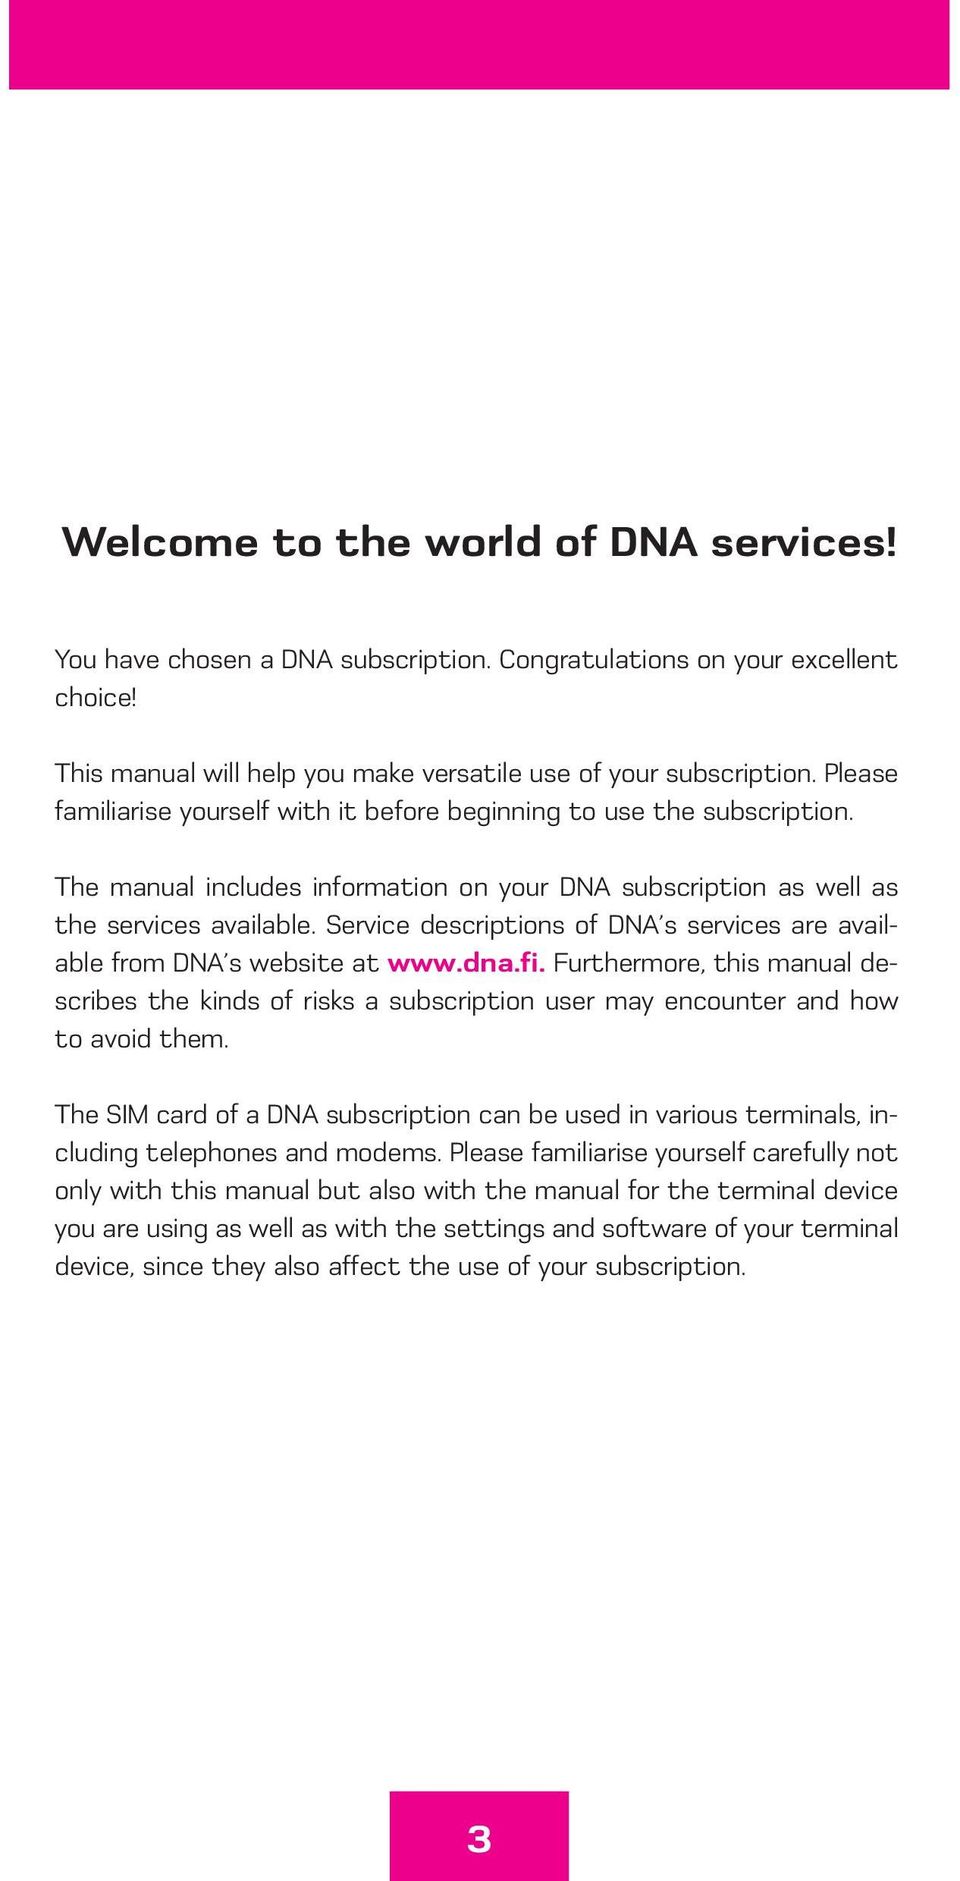 Service descriptions of DNA s services are available from DNA s website at www.dna.fi. Furthermore, this manual describes the kinds of risks a subscription user may encounter and how to avoid them.